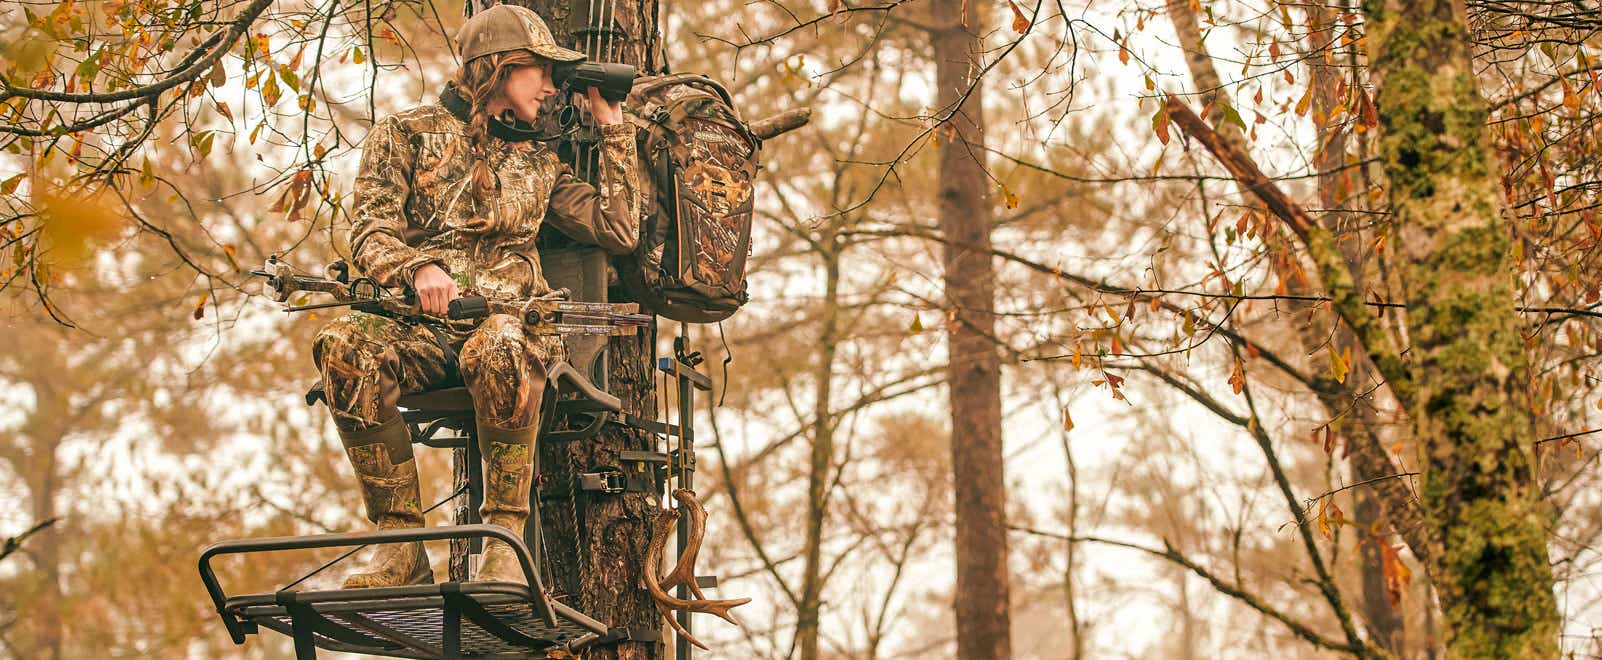 A hunter in a stand looking for deer with binoculars